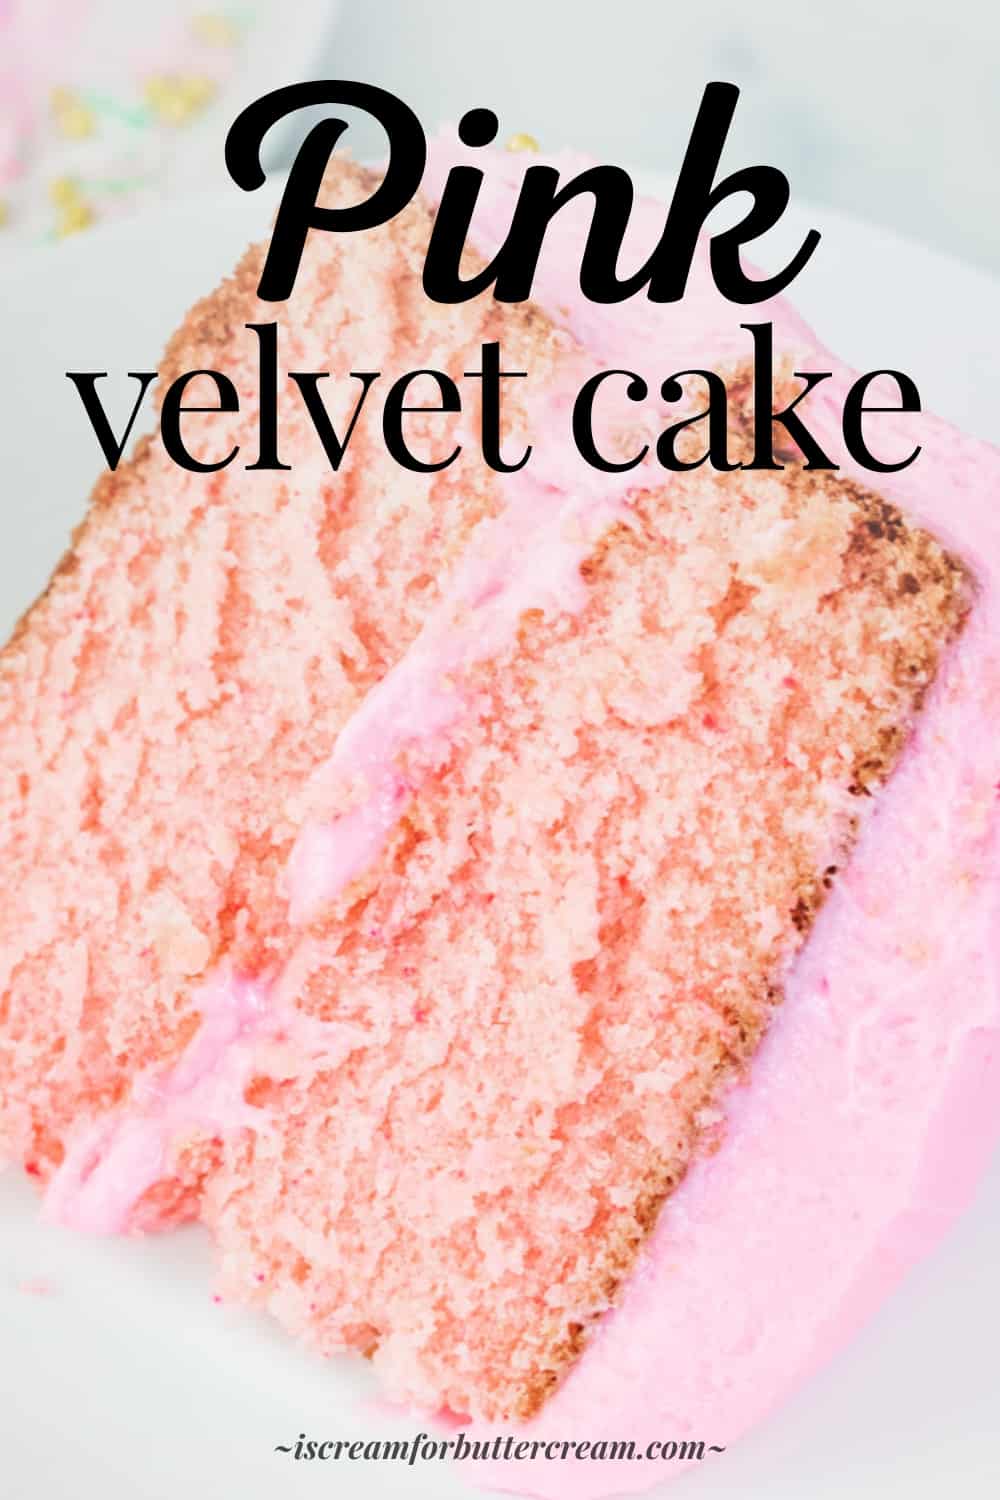 Close up of pink cake with pink icing and text overlay.